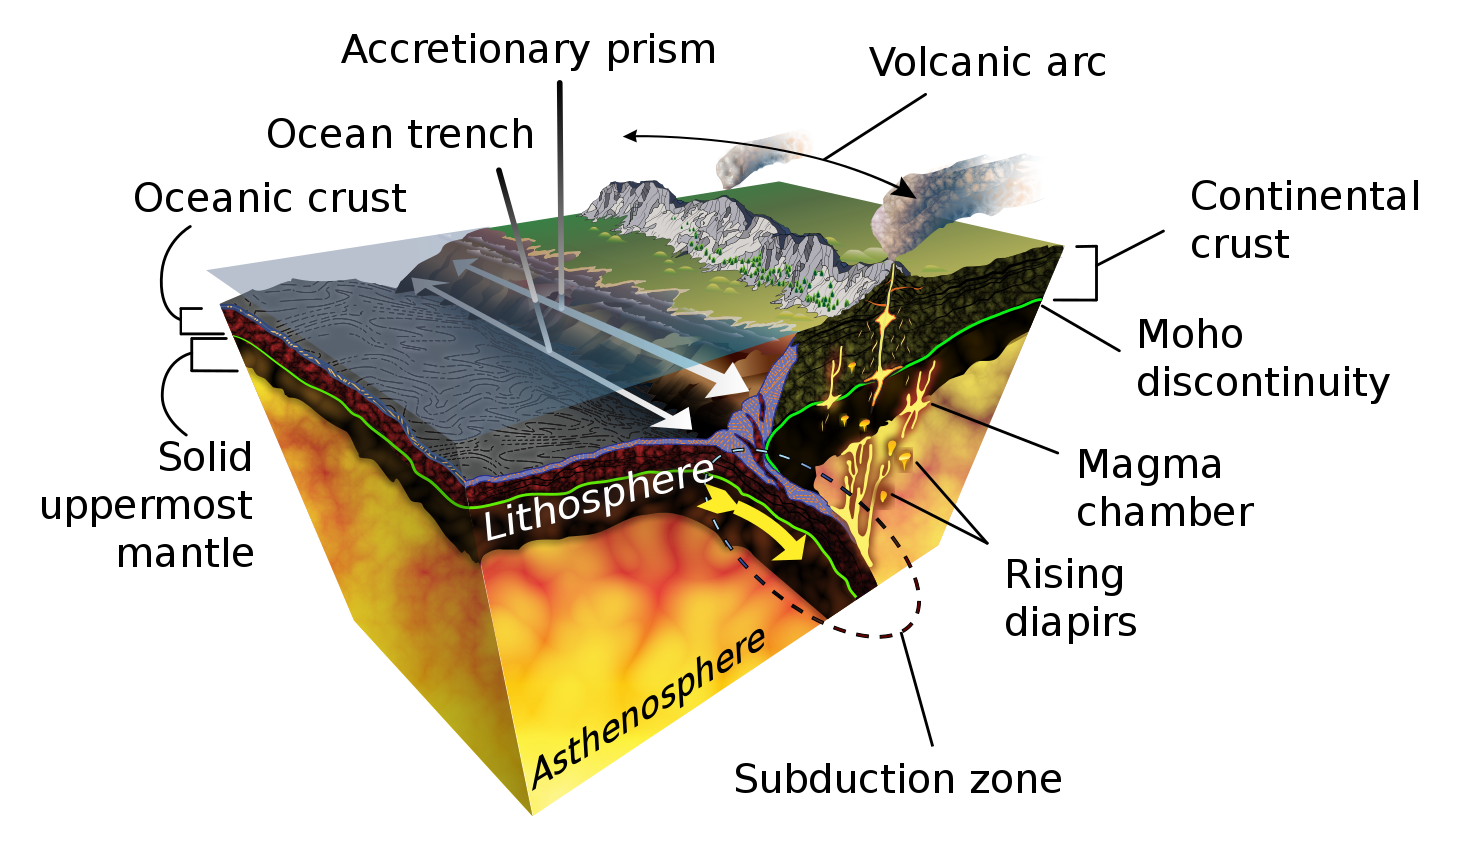 3D diagram showing oceanic crust moving toward the right where it collides with continental crust and subducts down beneath it. Above the contact between the two plates, there is an ocean trench and accretionary prism to the right of the trench. There is a volcanic arc on top of the continental plate, above where the oceanic crust has subducted beneath it. Rising diapirs are labeled below the volcanic arc. The Moho discontinuity is marked by a green line at the base of the crust in both tectonic plates, above the solid uppermost mantle.